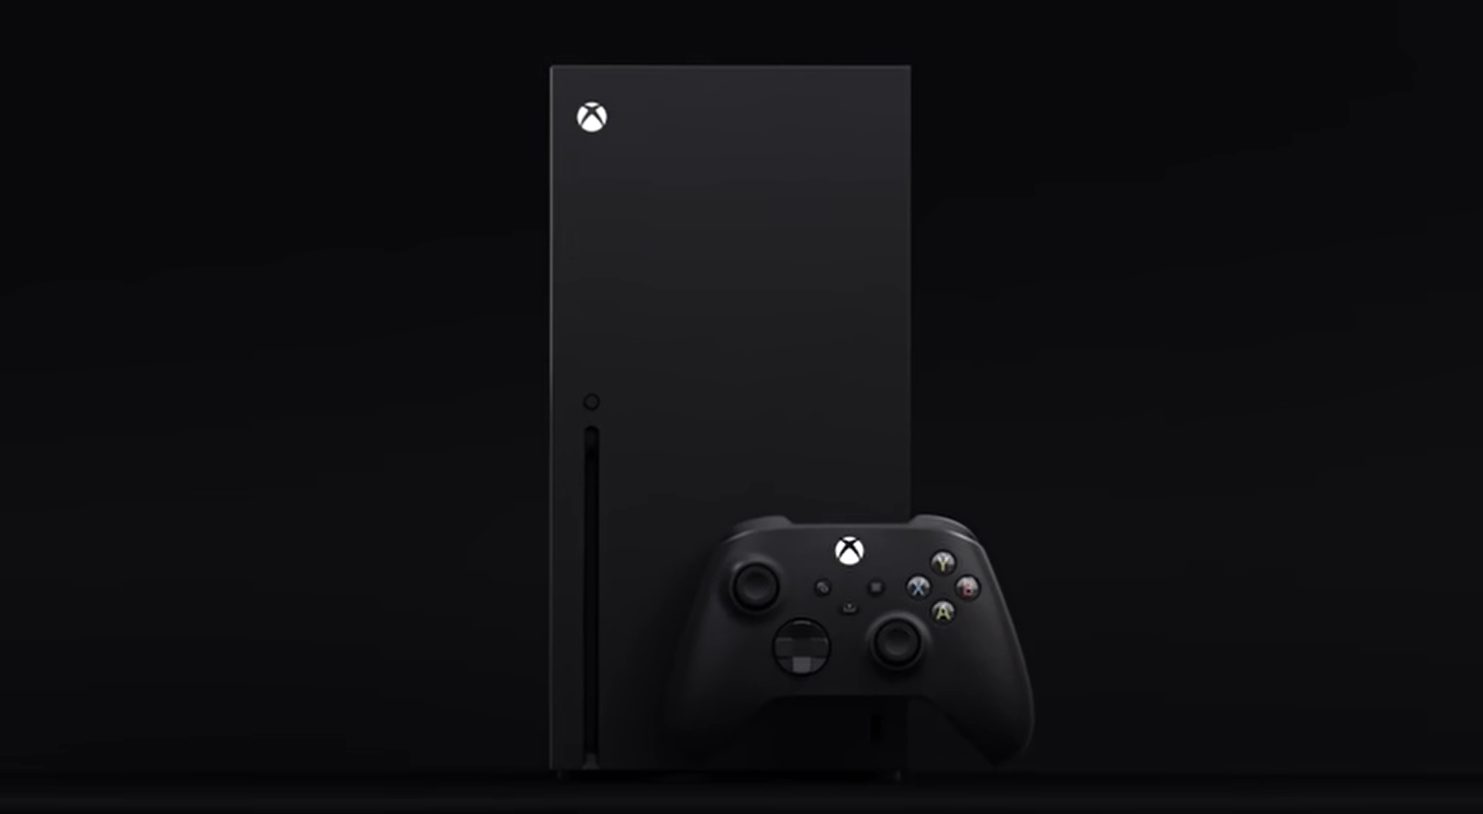 Microsoft Files New Trademark For The Xbox Series X Slogan, Including Both Video Game Content And Merchandise